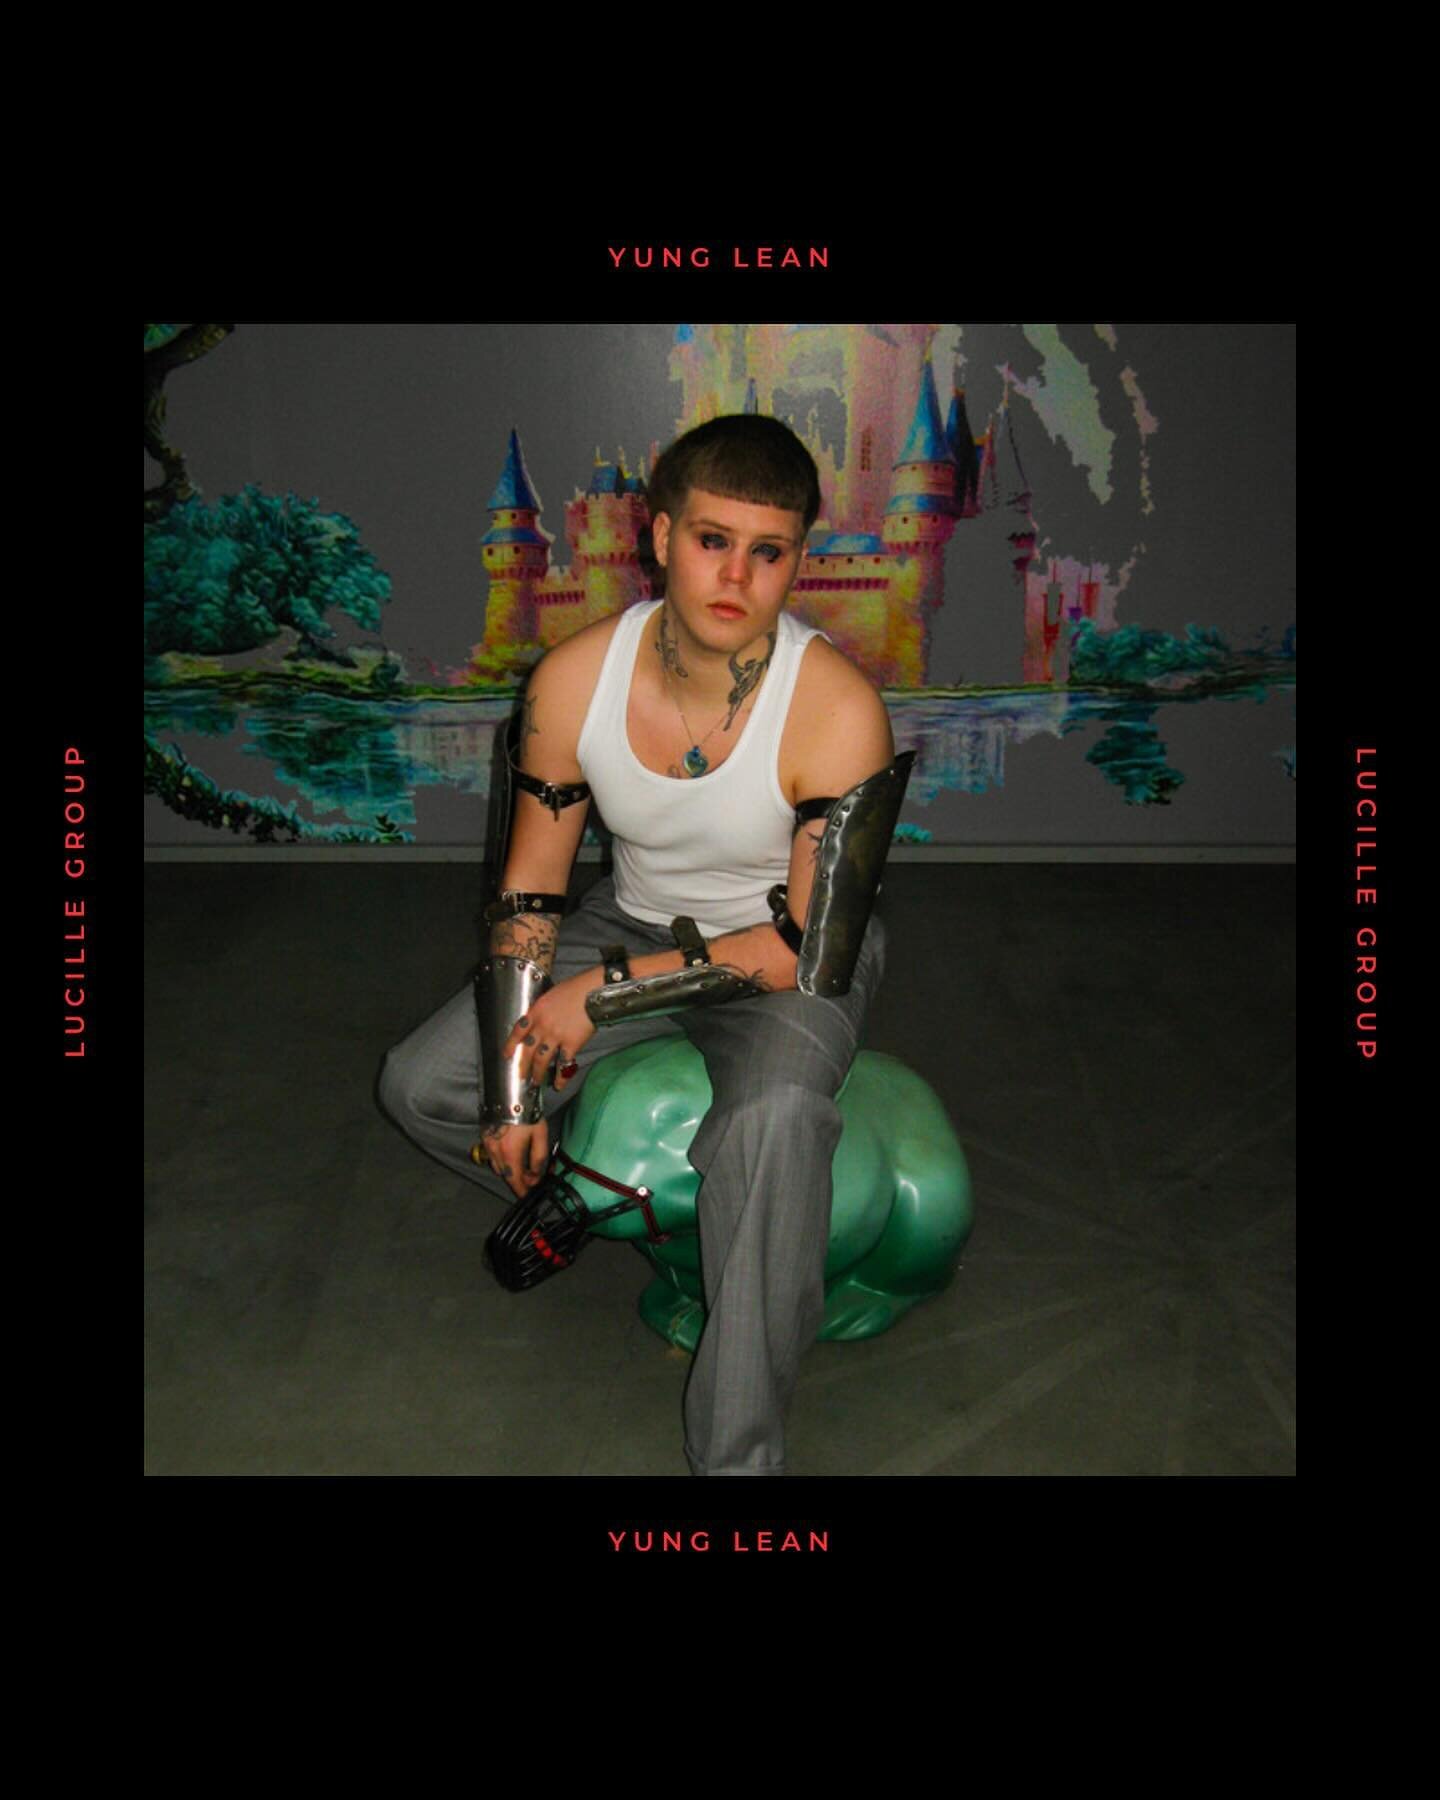 If you know about Yung Lean, chances are pretty big that you already know everything there is to know - ever since his breakthrough he has had an incredibly loyal and dedicated fanbase. His first hit single &ldquo;Ginseng Strip 2002&rdquo; has been l